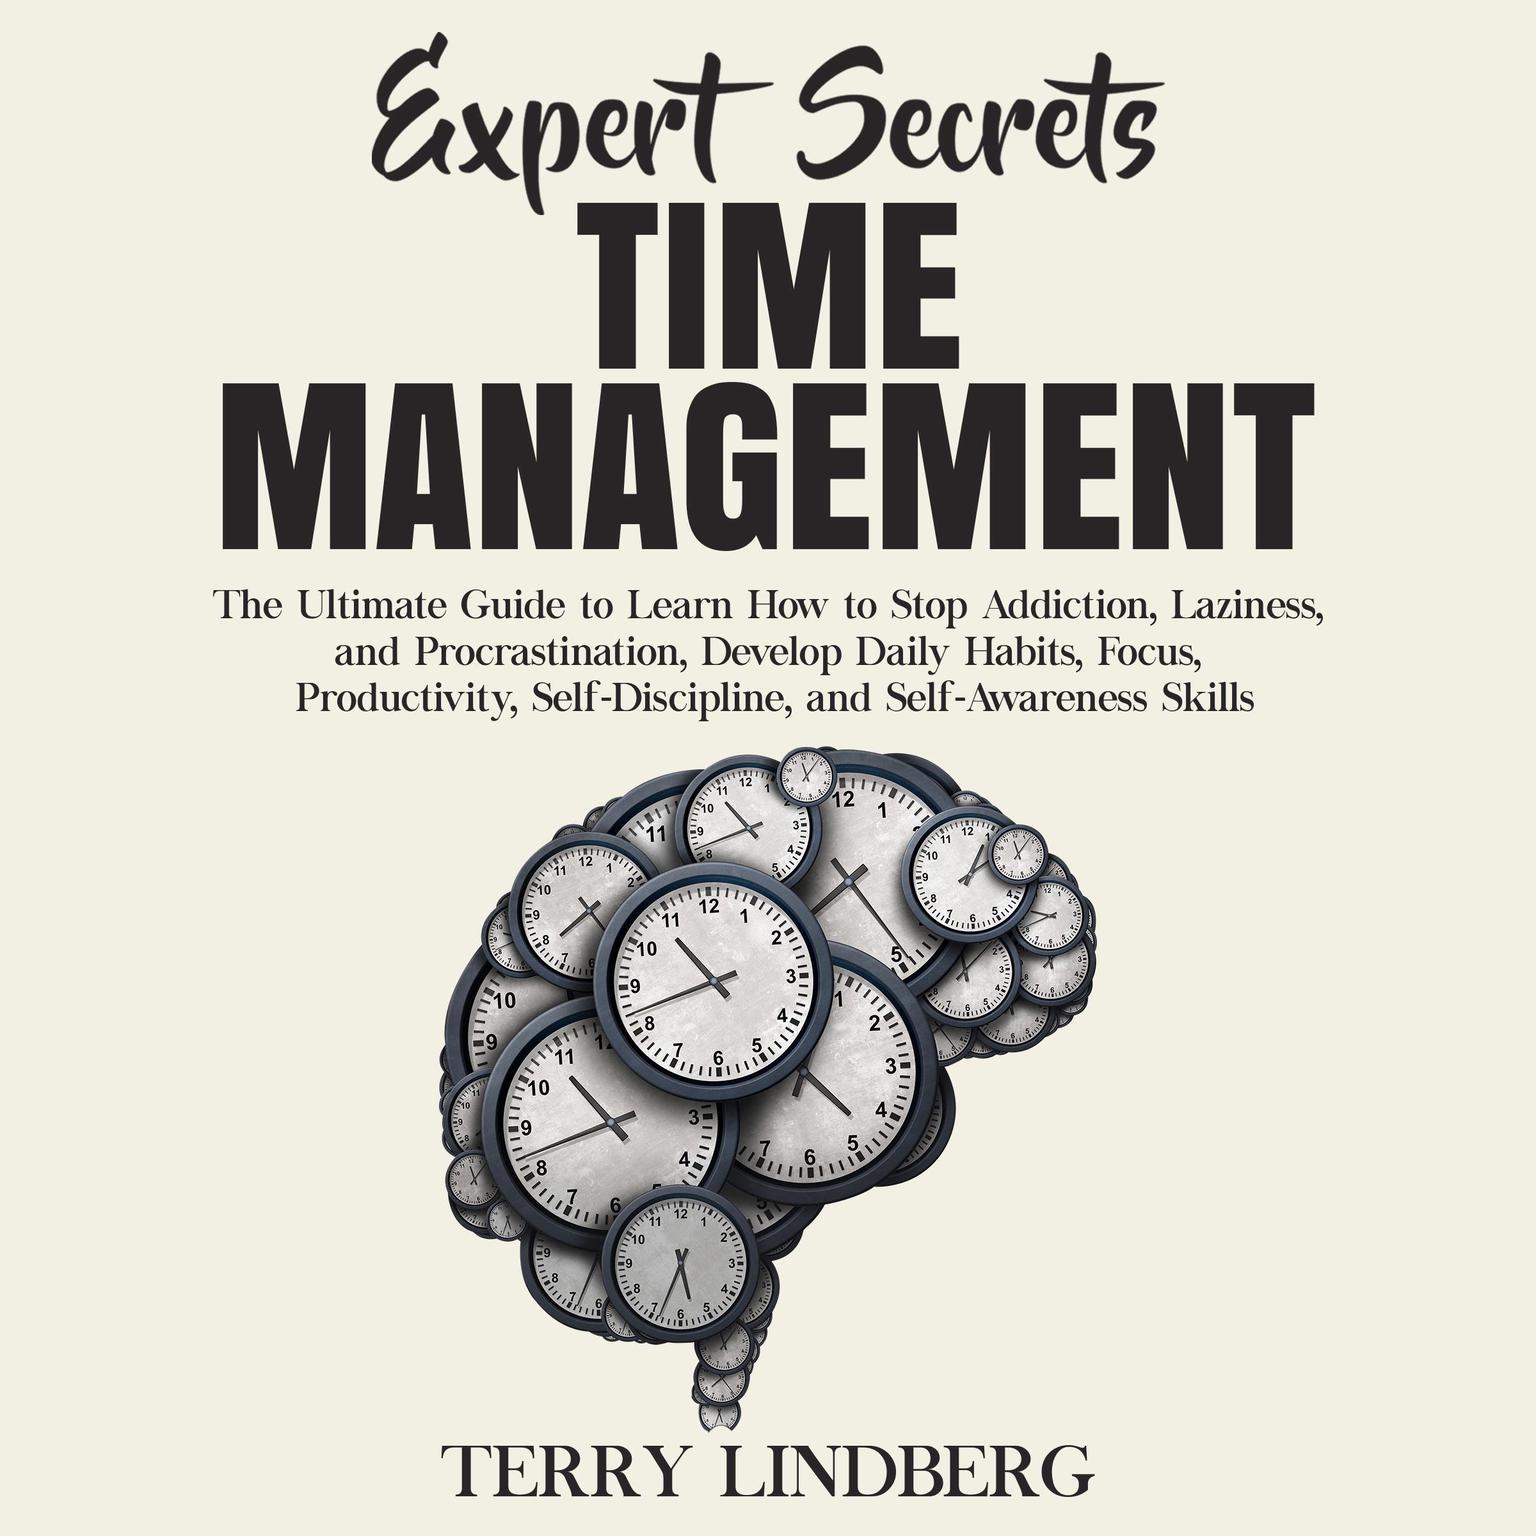 Expert Secrets – Time Management: The Ultimate Guide to Learn How to Stop Addiction, Laziness, and Procrastination, Develop Daily Habits, Focus, Productivity, Self-Discipline, and Self-Awareness Skills. Audiobook, by Terry Lindberg